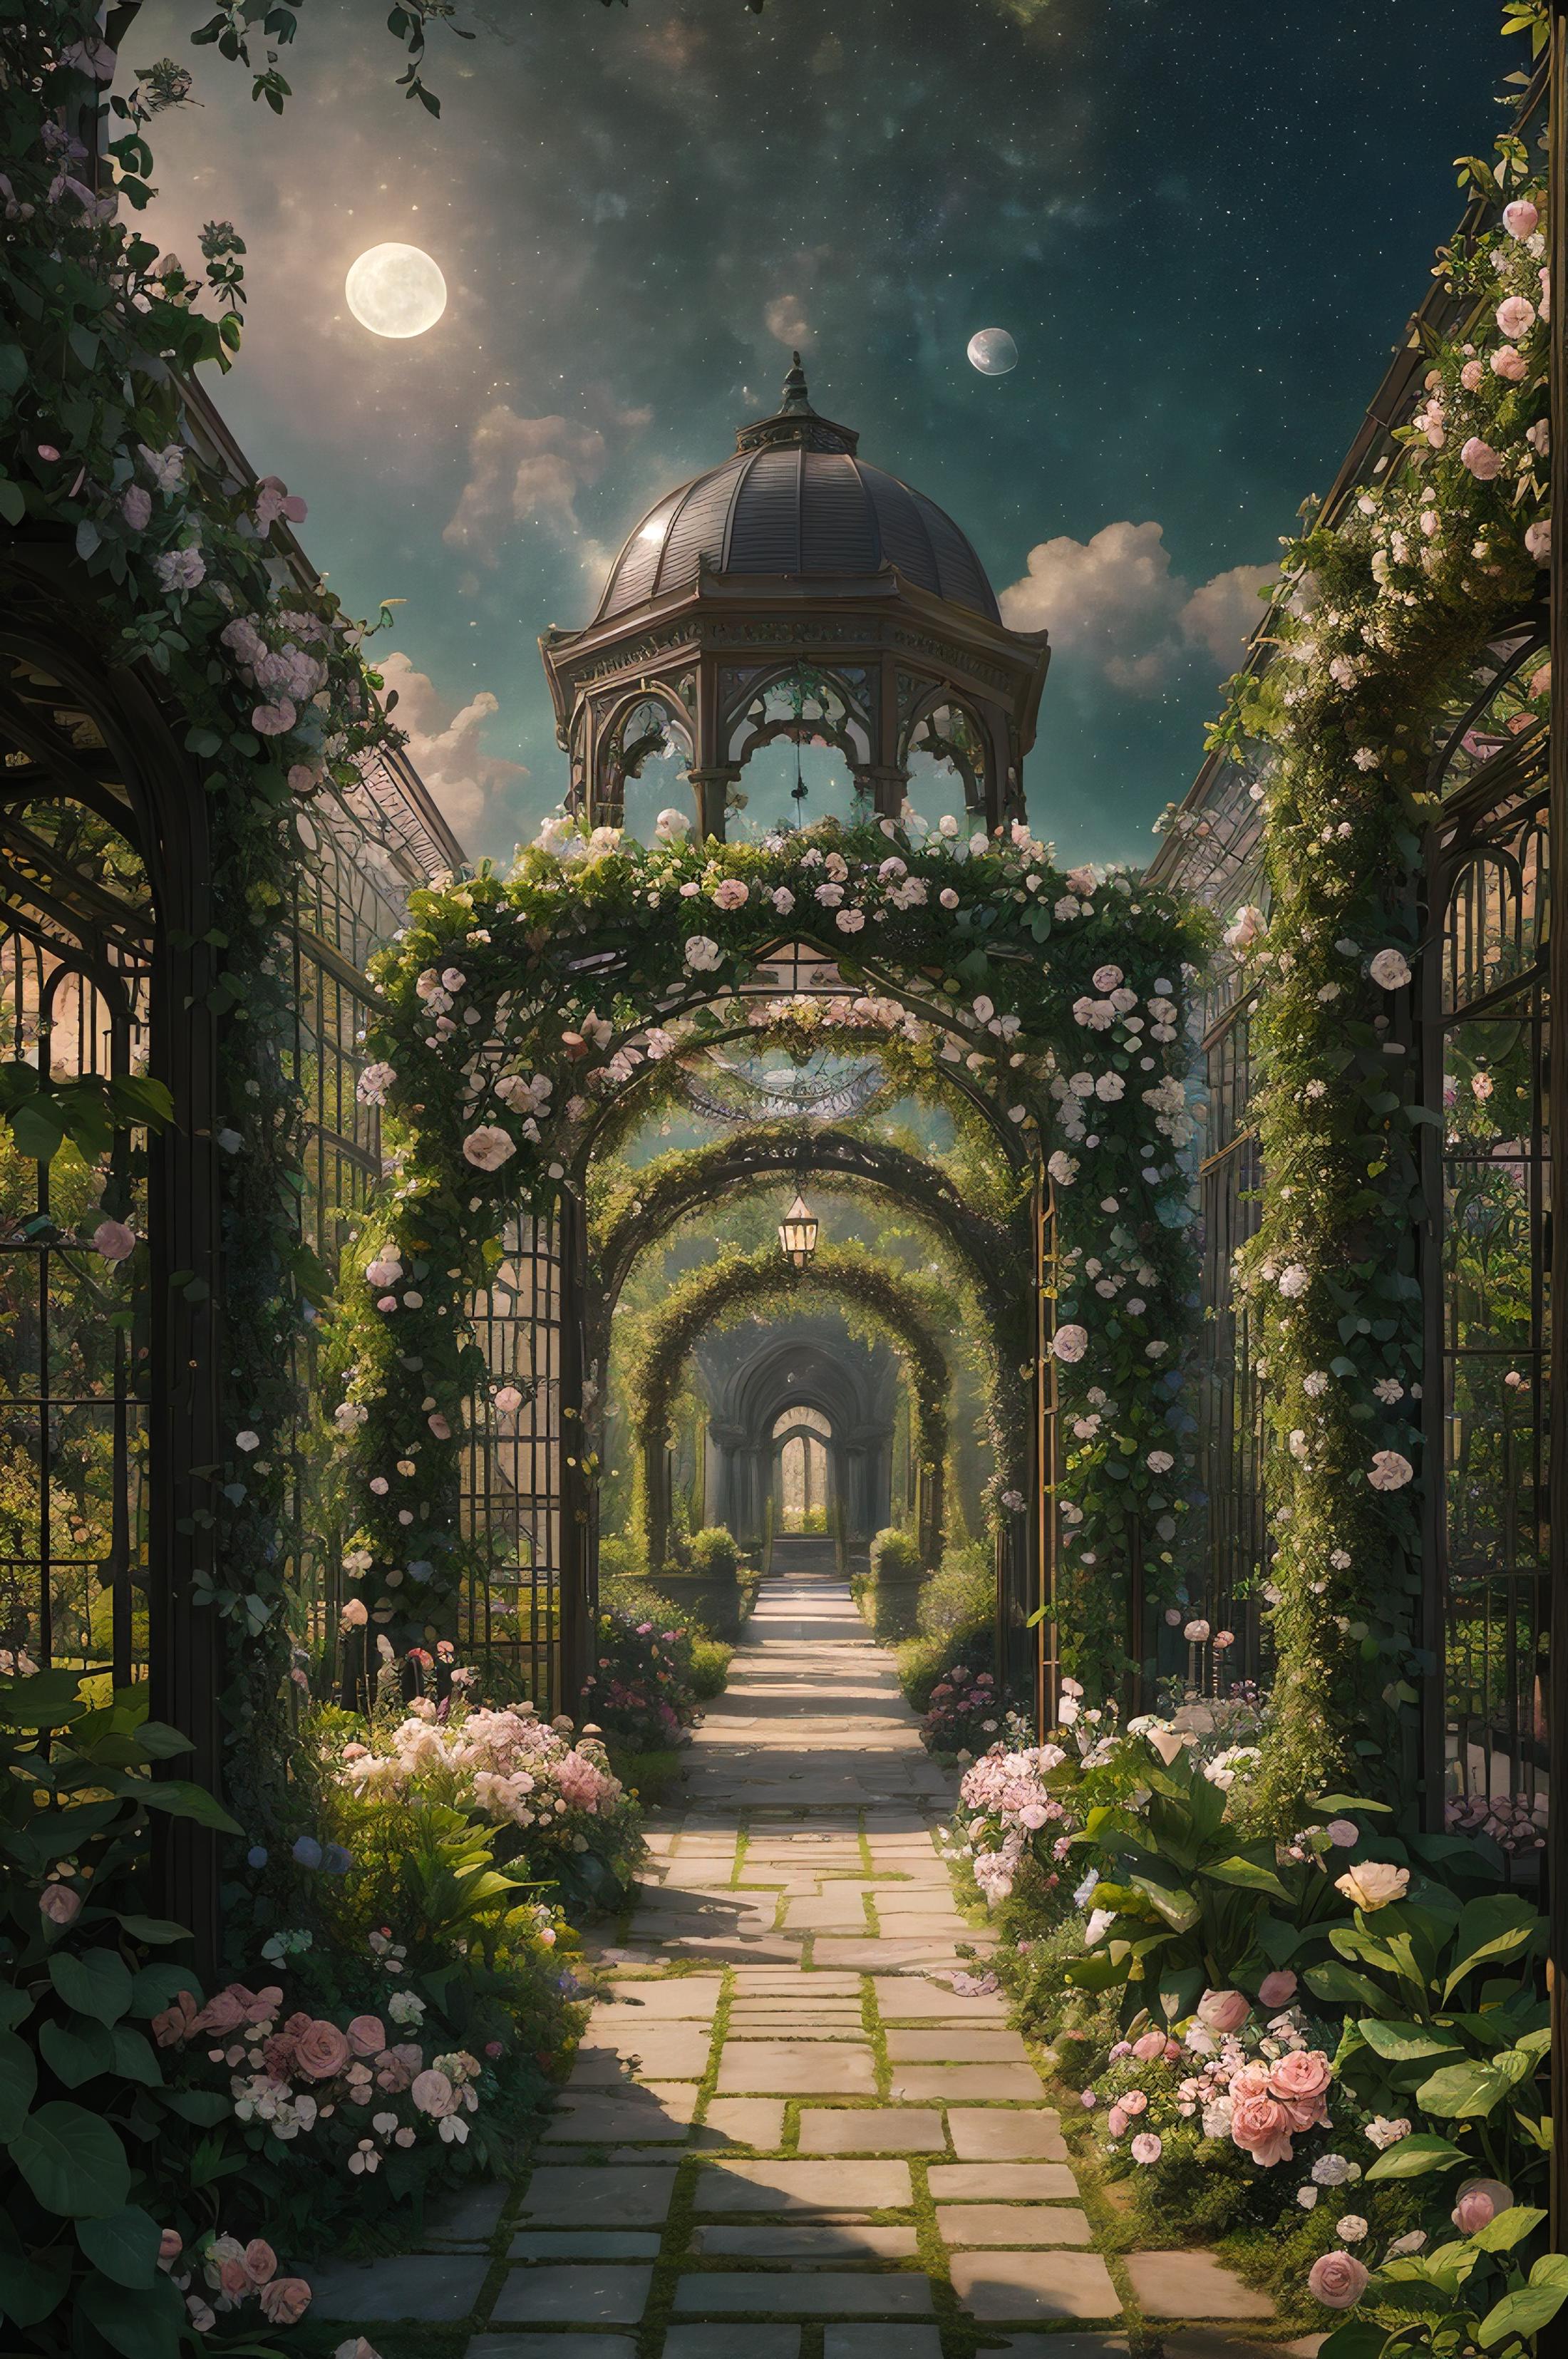 Entrance to a garden with a walkway lined with flowers and a dome above.